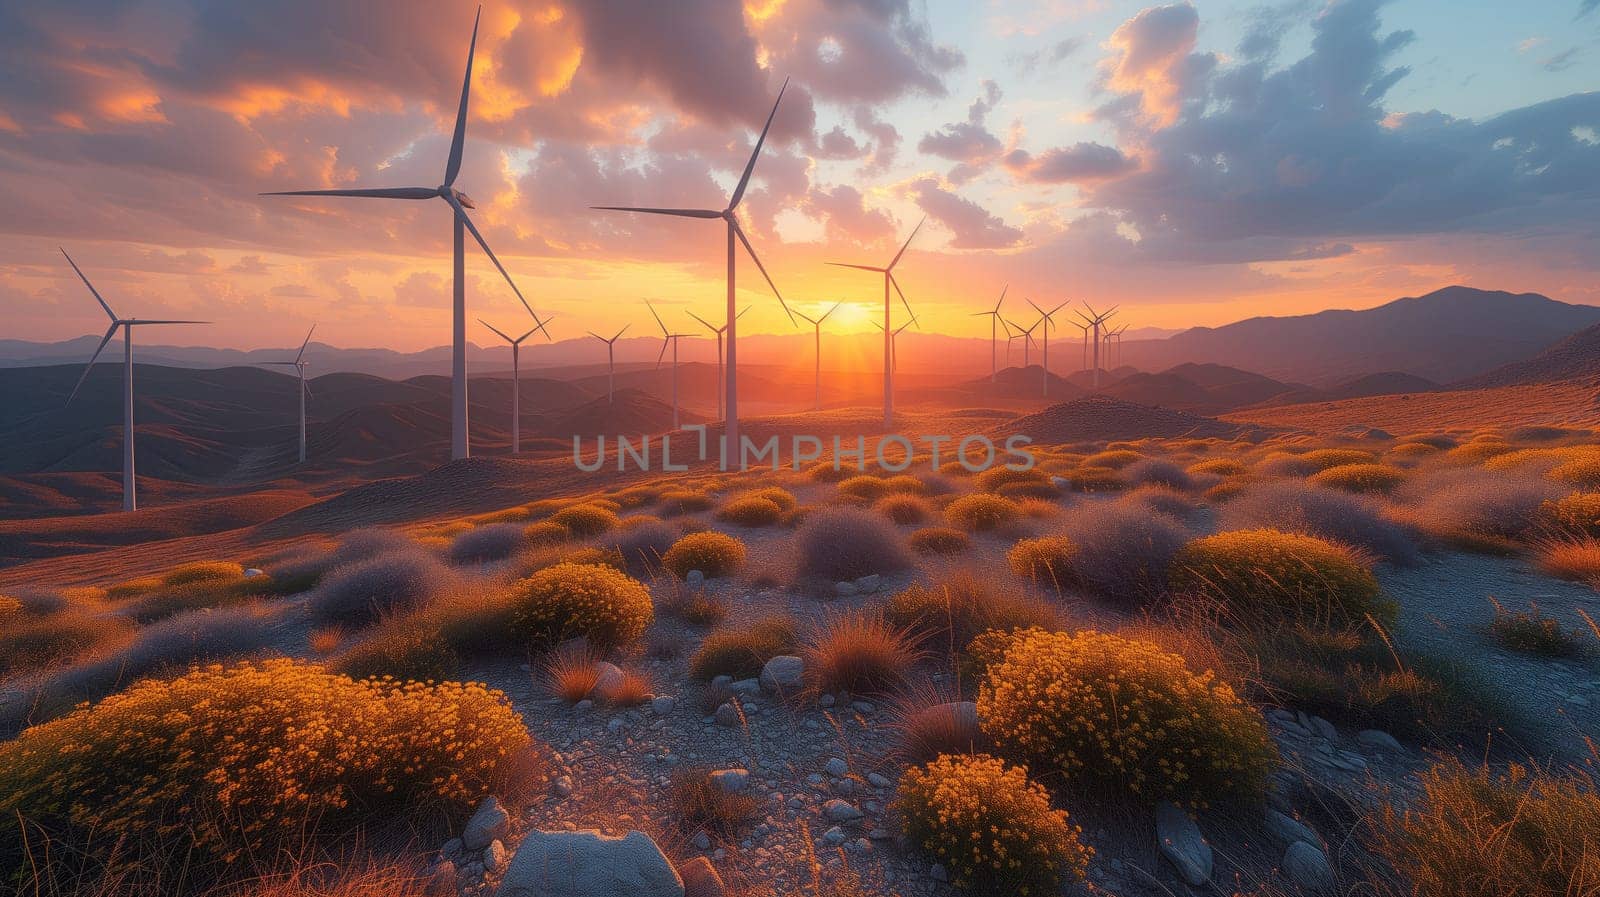 A row of wind turbines in the desert under a colorful sunset sky with scattered cumulus clouds, creating a serene natural landscape